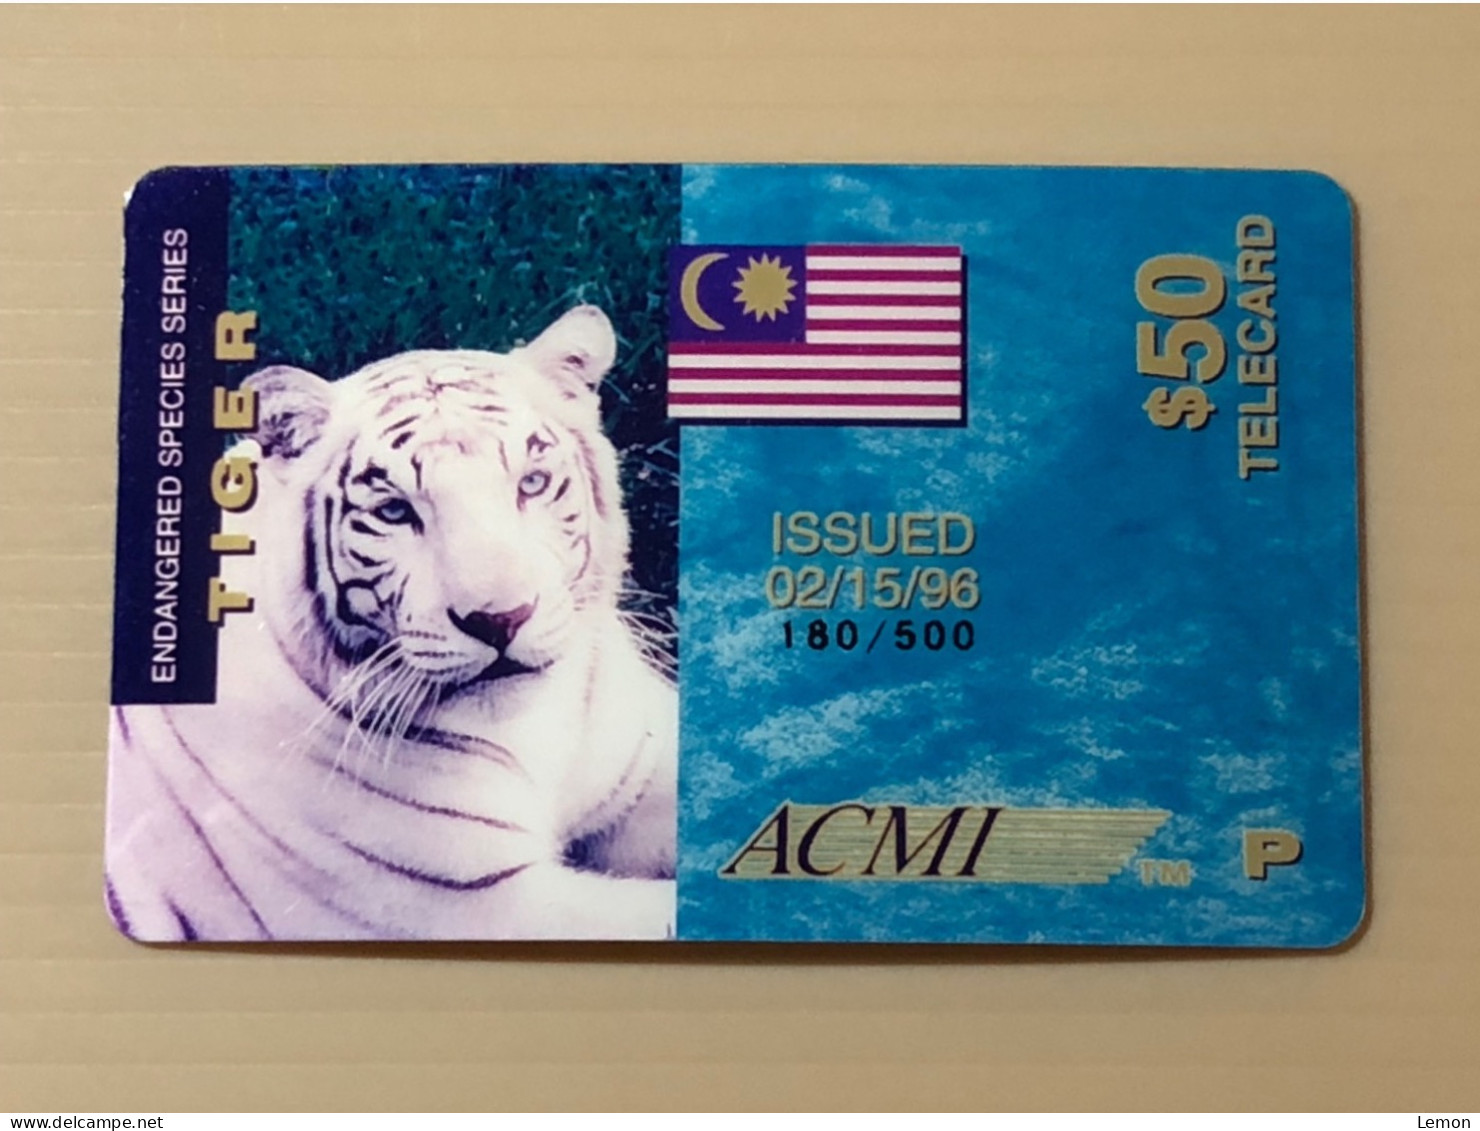 Mint USA UNITED STATES America Prepaid Telecard Phonecard, Endangered Species Series White Tiger (500EX),1 $50 Mint Card - Colecciones